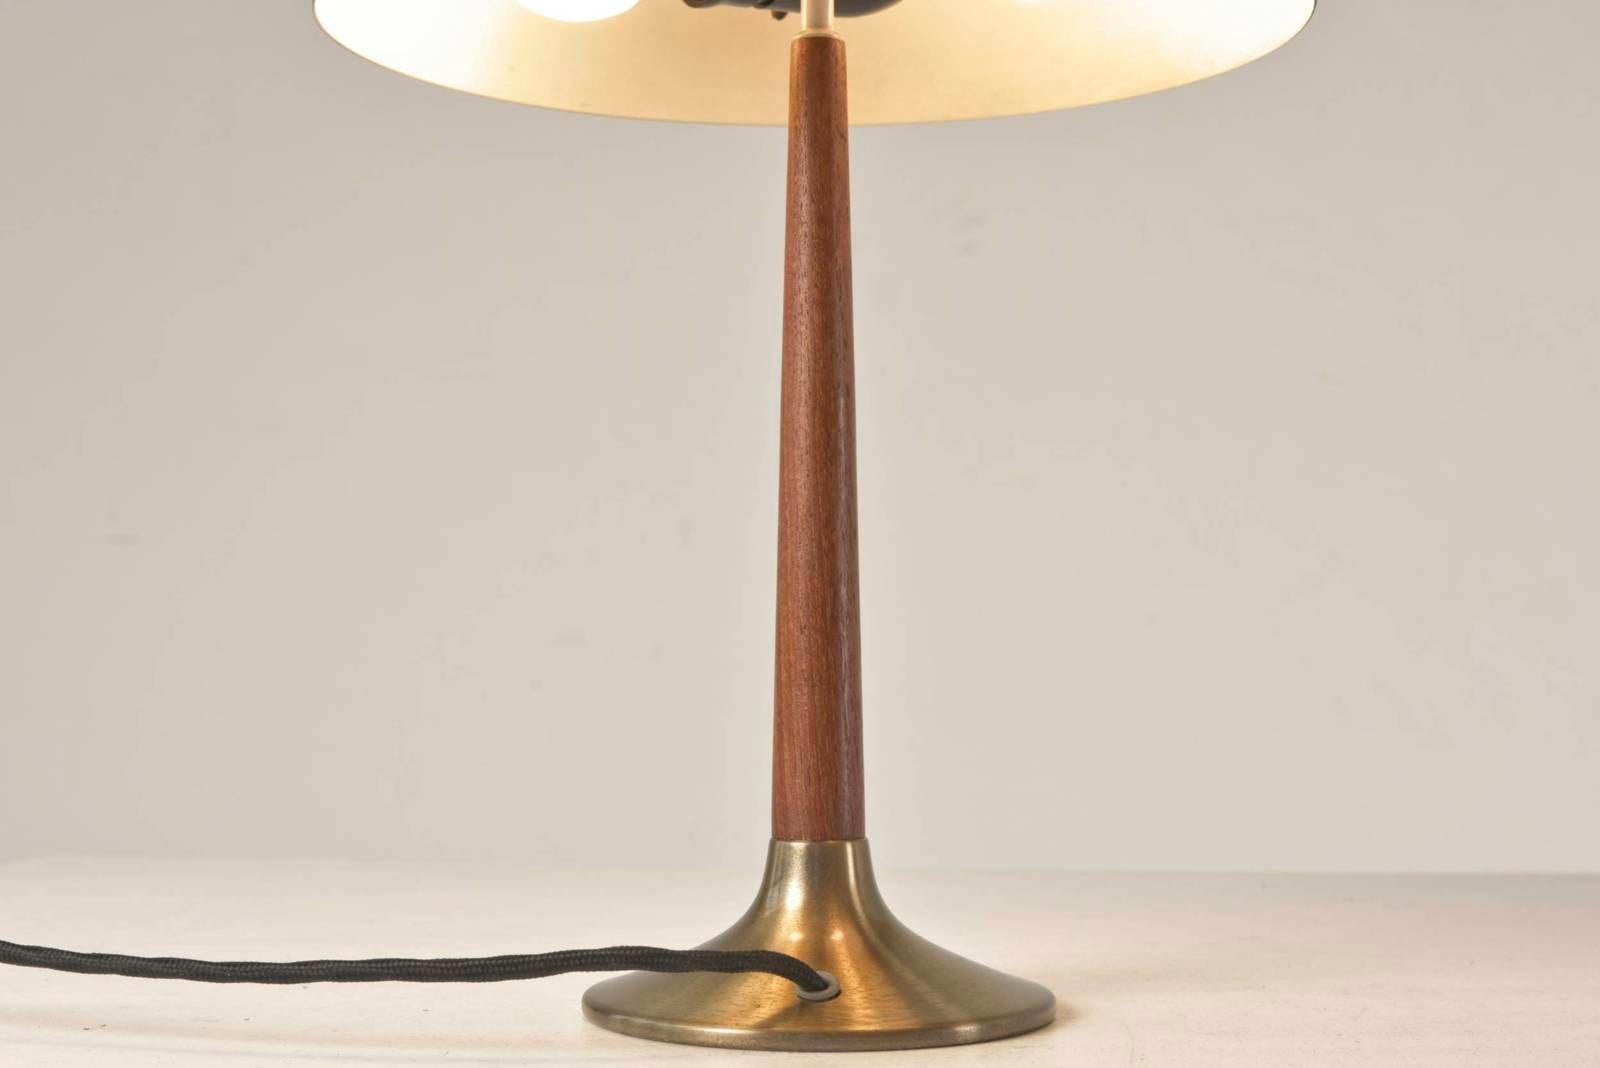 Mid-20th Century Table Lamp 41101 by Svend Aage Holm-Sørensen in Brass and Teak, Denmark - 1965 For Sale